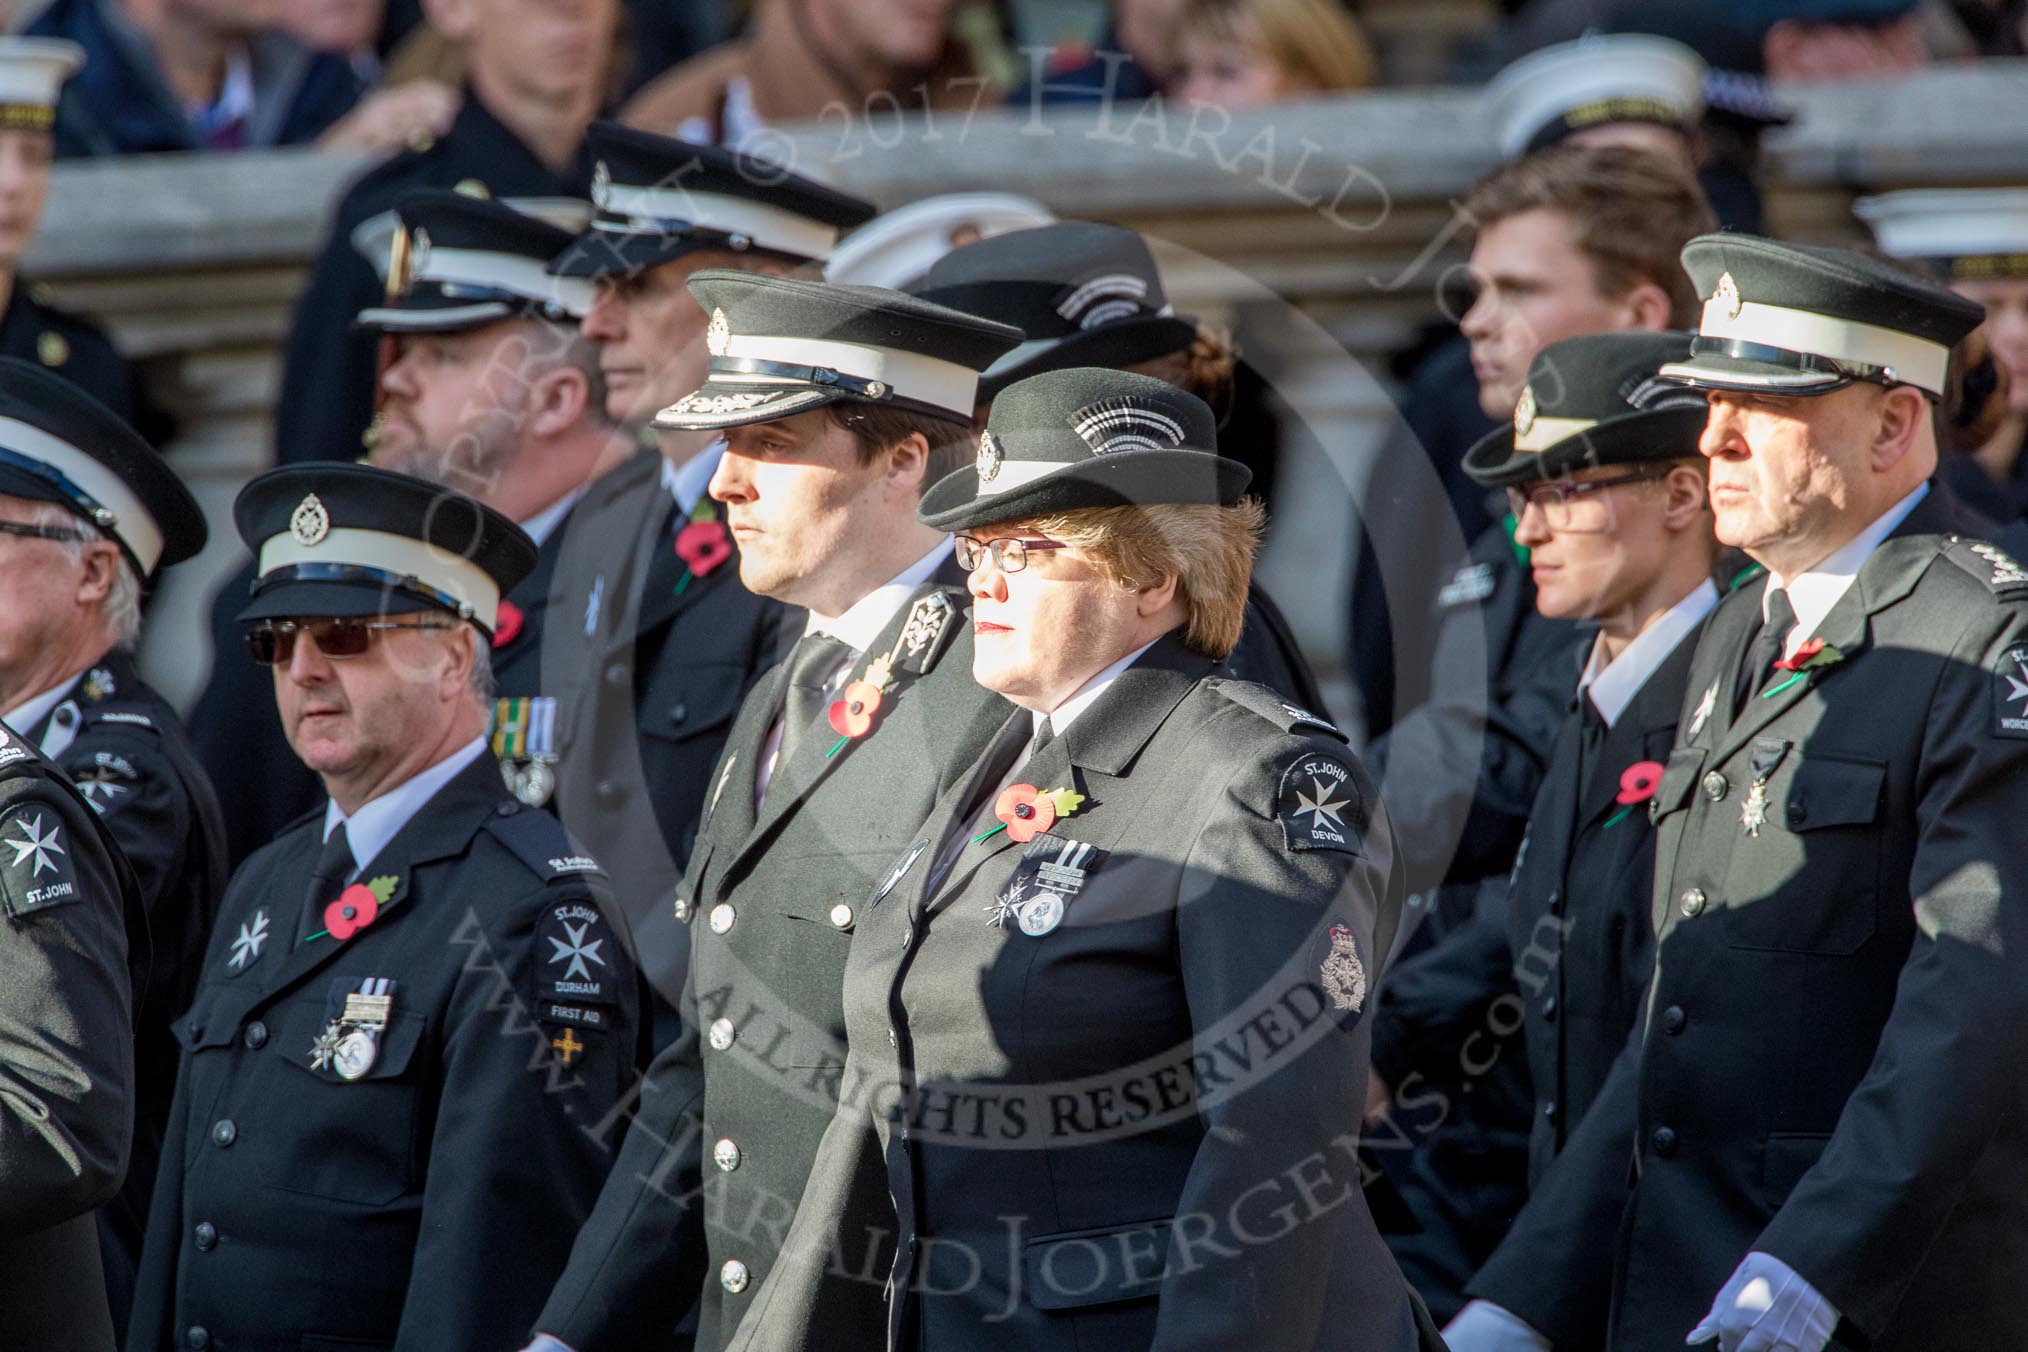 St John Ambulance (Group M12, 25 members) during the Royal British Legion March Past on Remembrance Sunday at the Cenotaph, Whitehall, Westminster, London, 11 November 2018, 12:26.